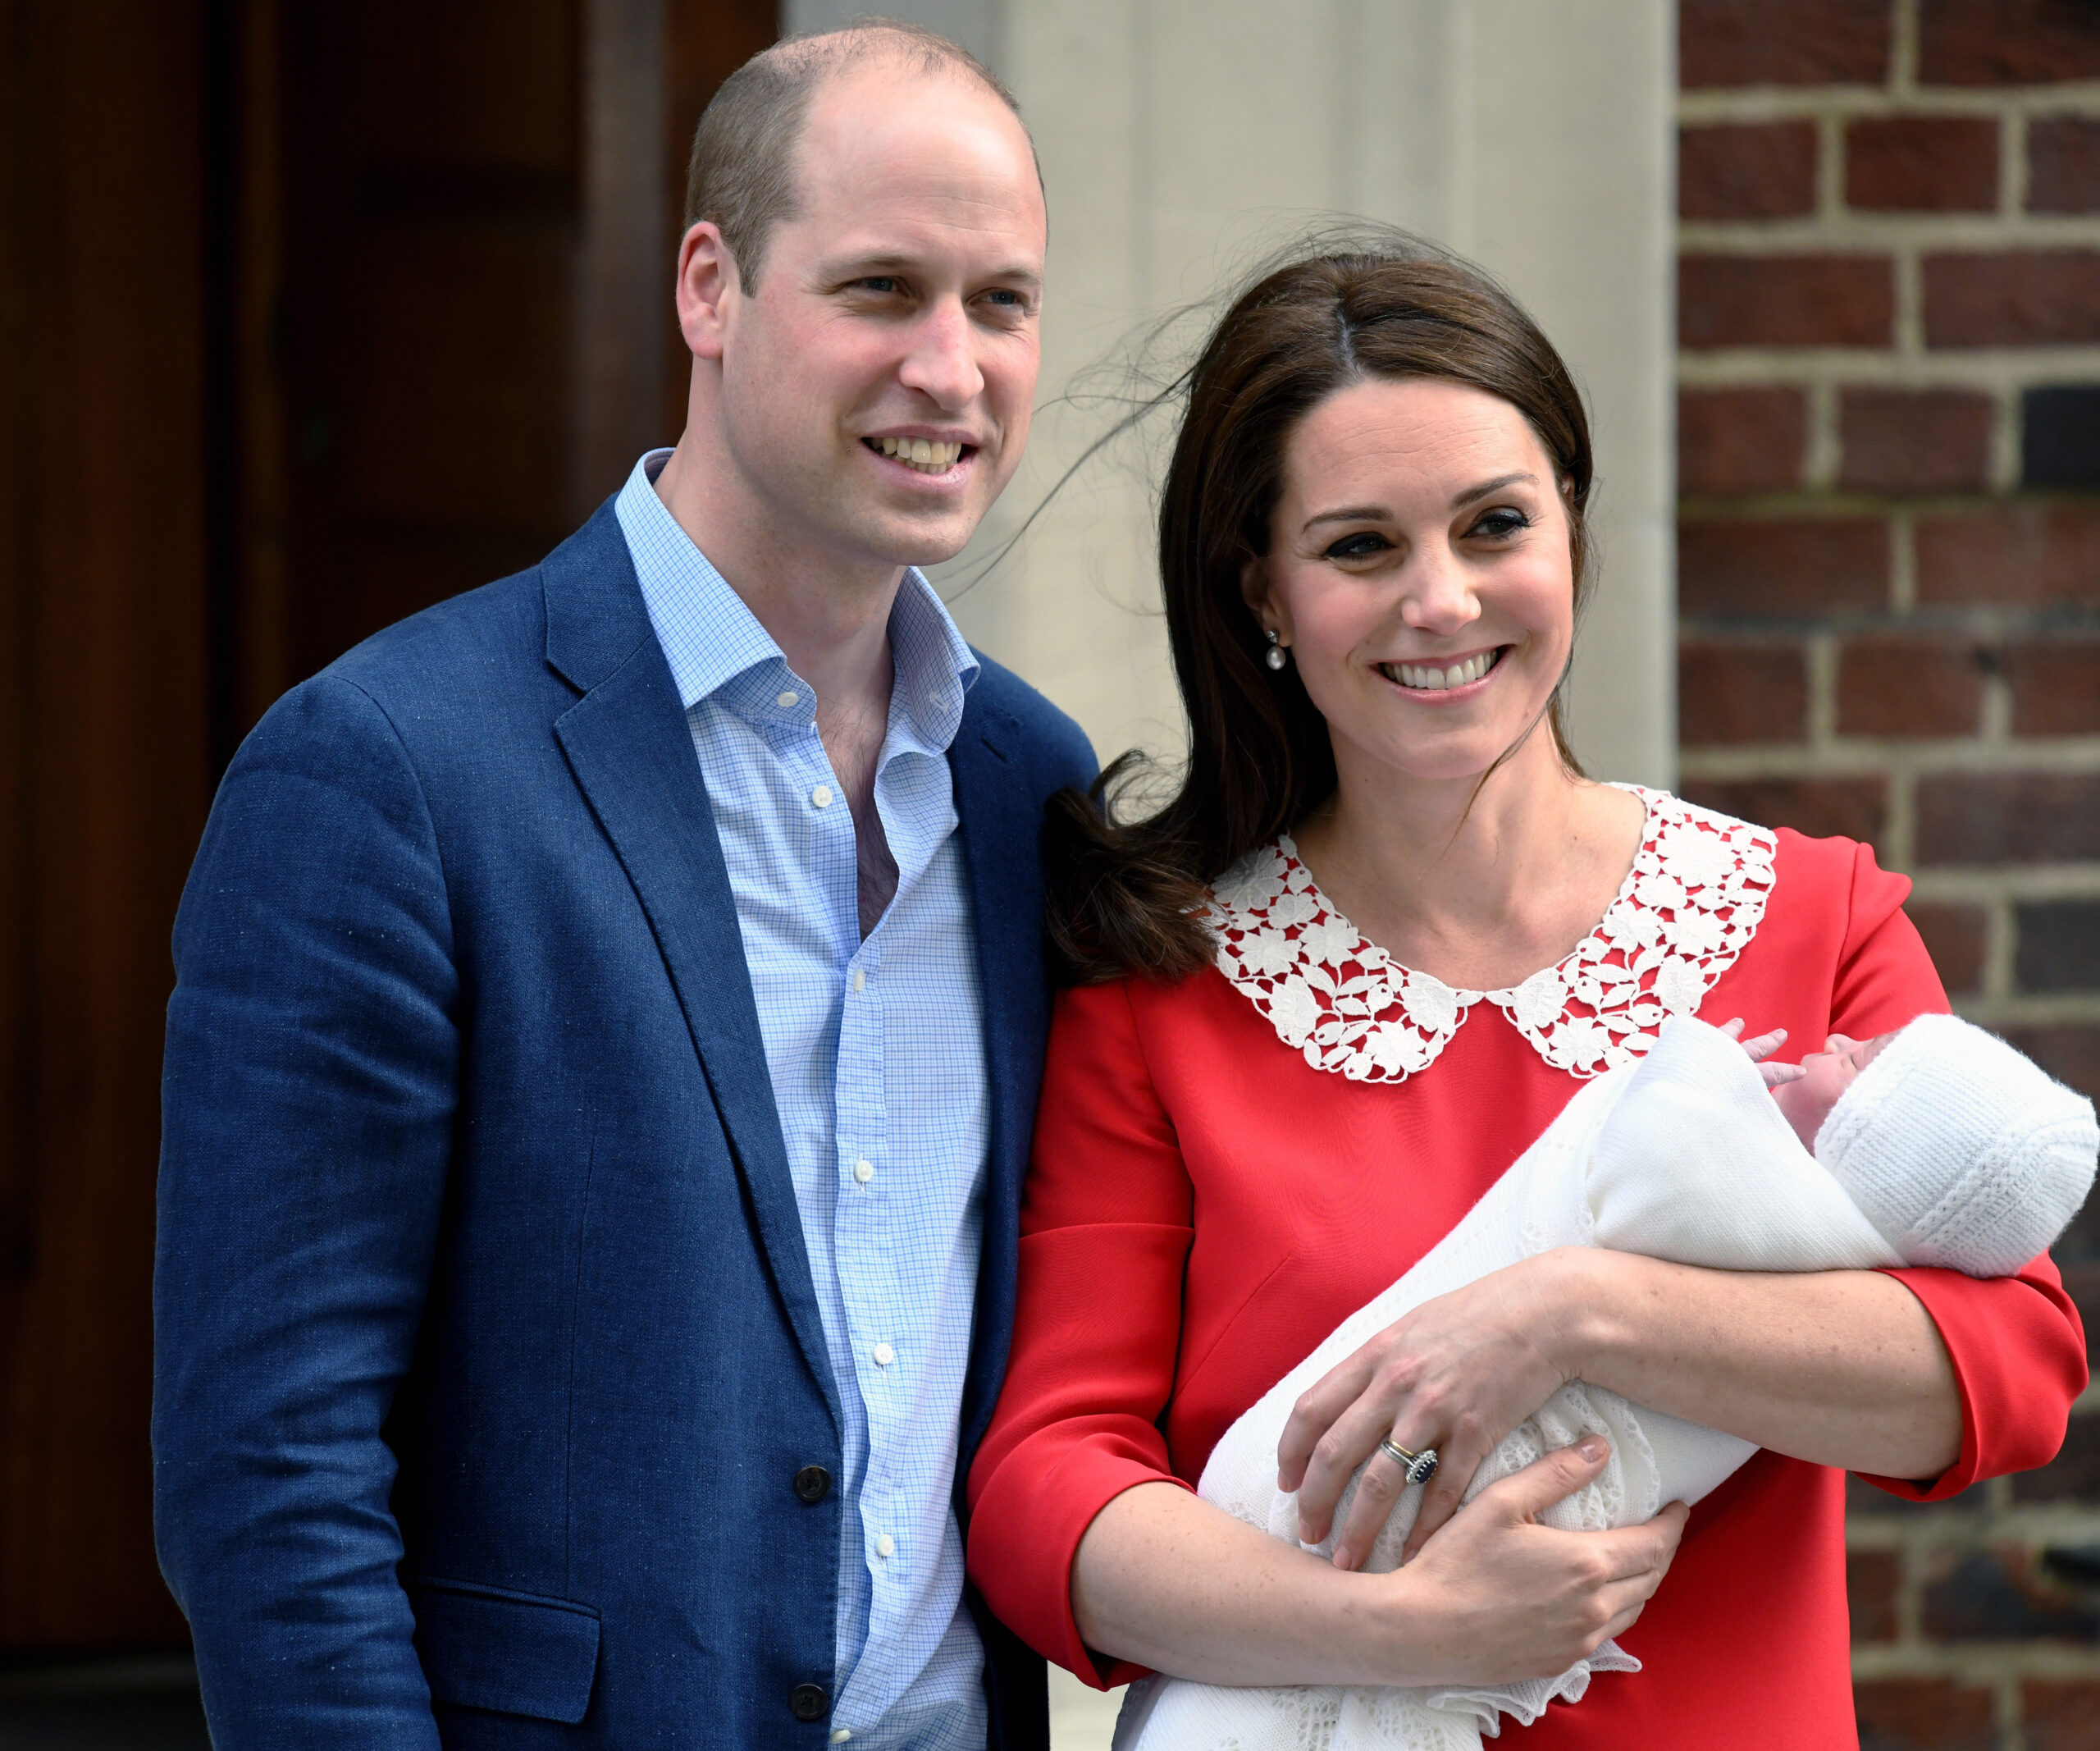 New mums are posting their post-birth pics following Duchess Catherine’s super-quick hospital stay